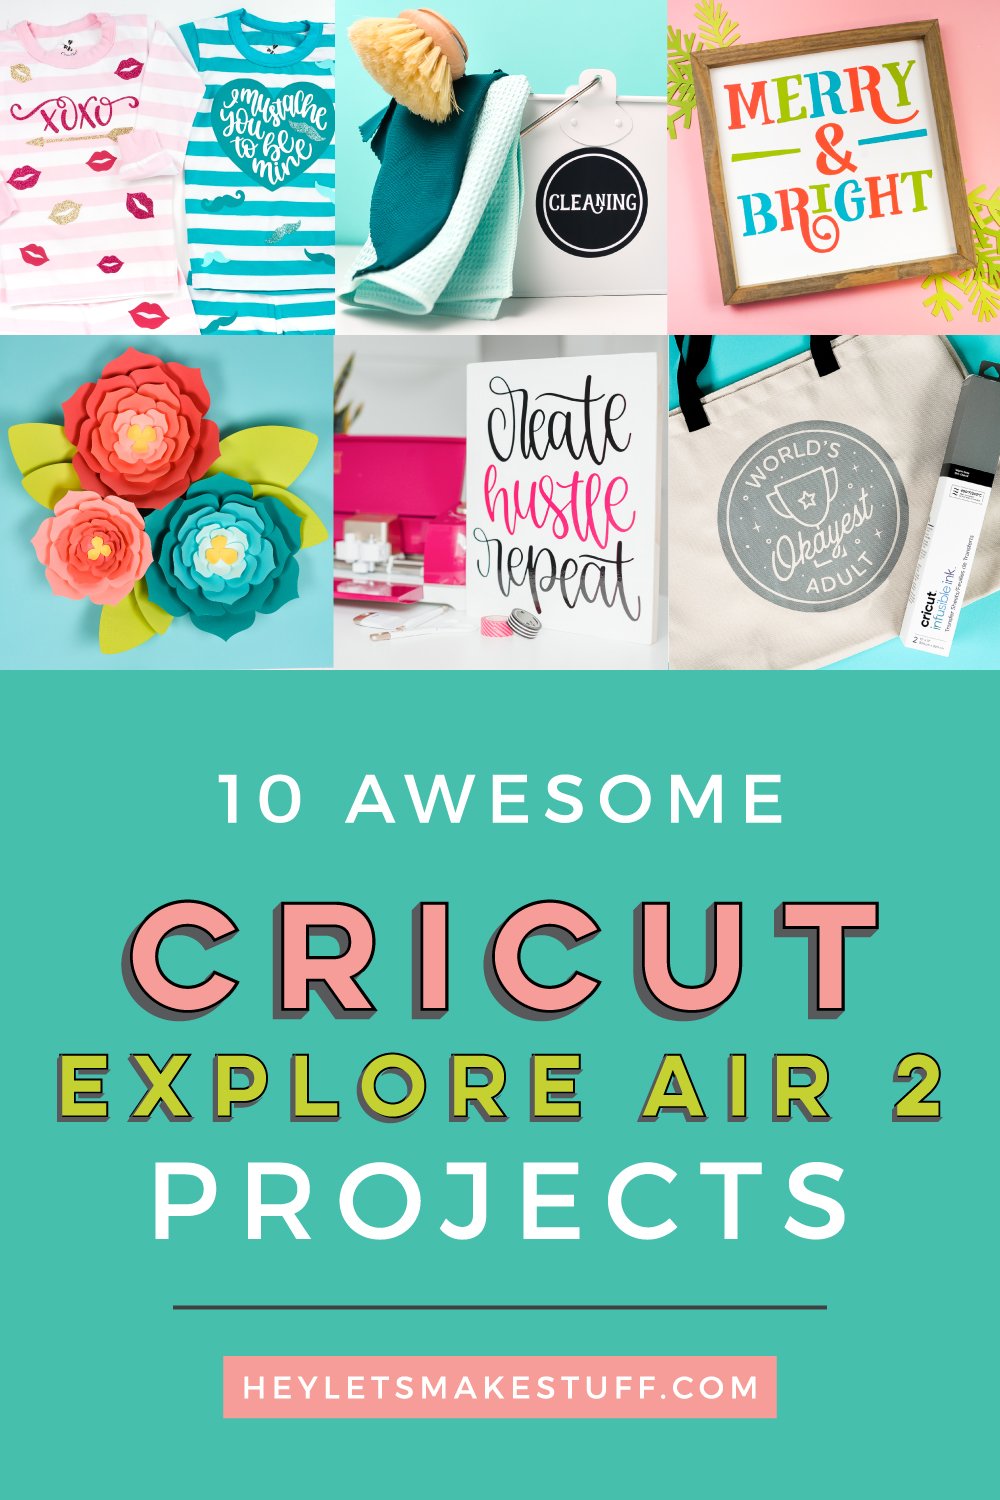 10 Projects For Your Cricut Explore Air 2 - Hey, Let's Make Stuff